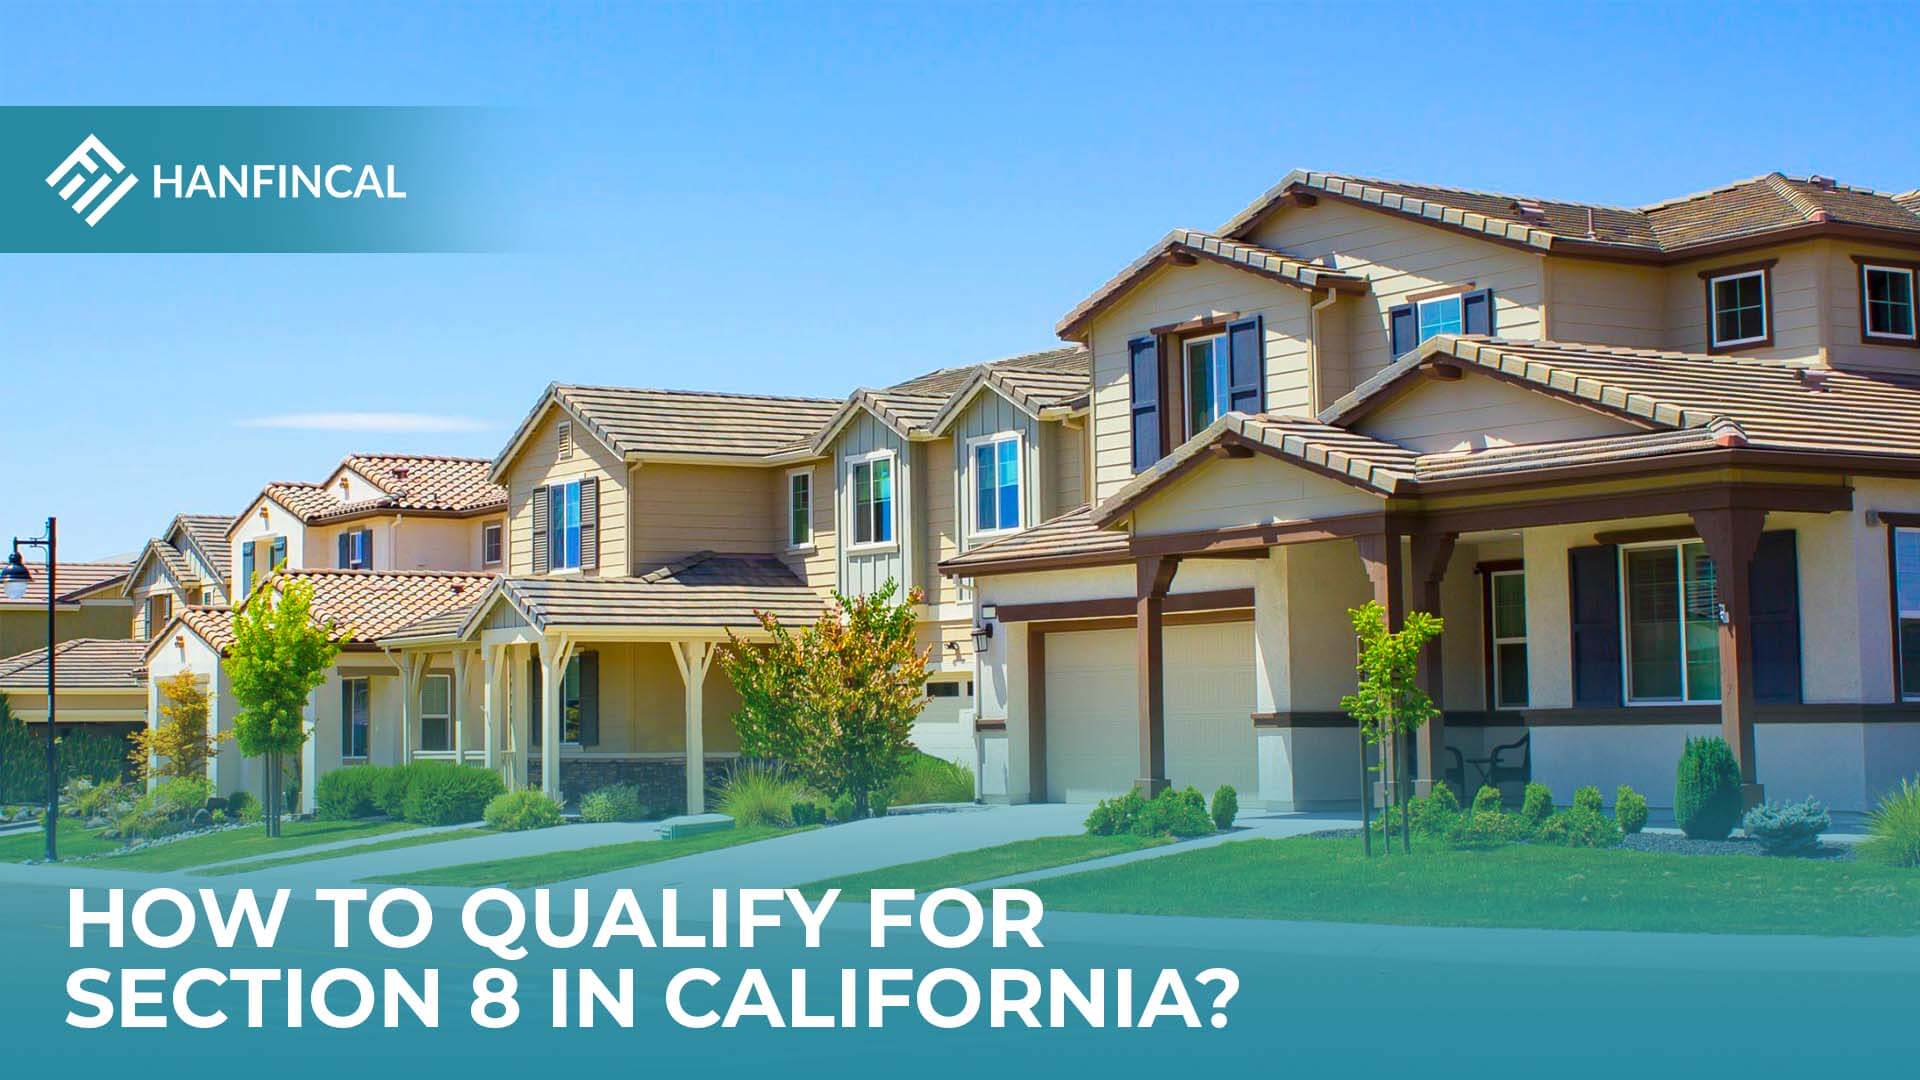 How to qualify for Section 8 in California?